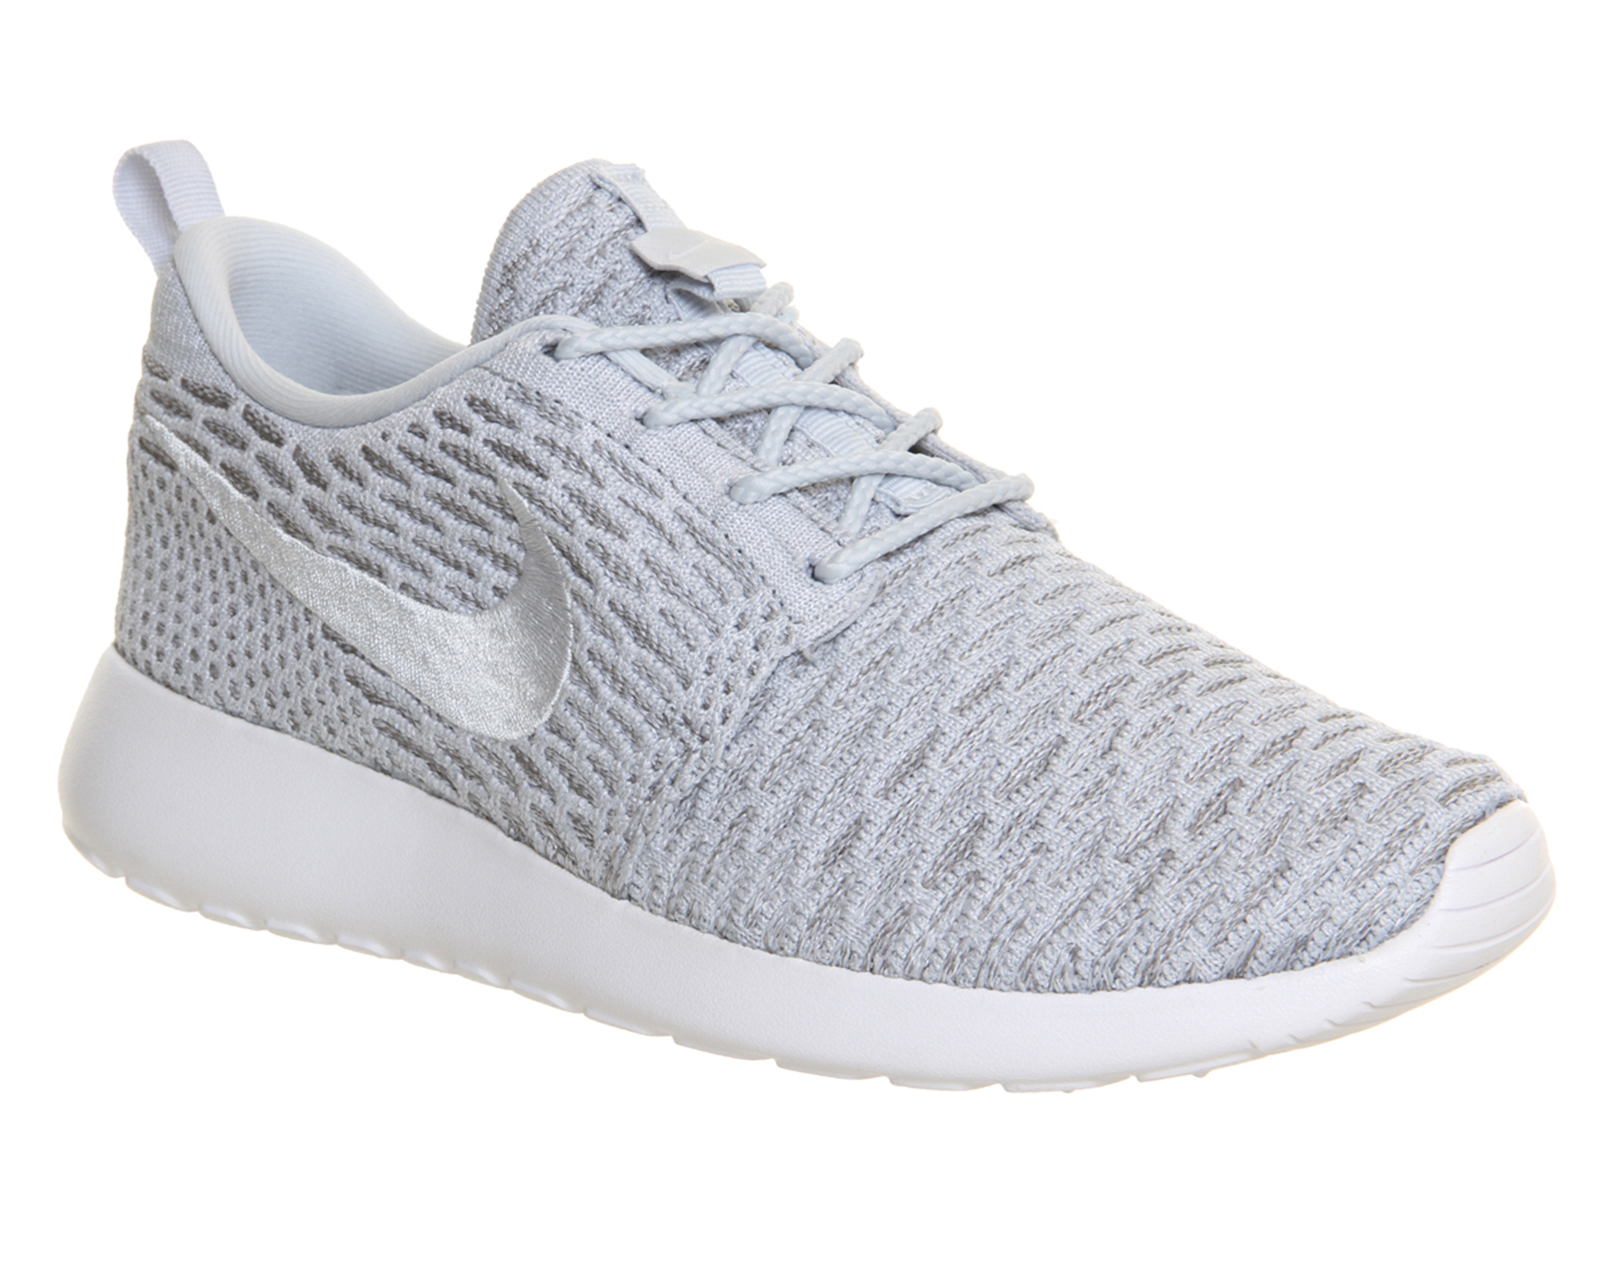 Nike Roshe Run Flyknit (w) Wolf Grey Light Charcoal - Hers trainers